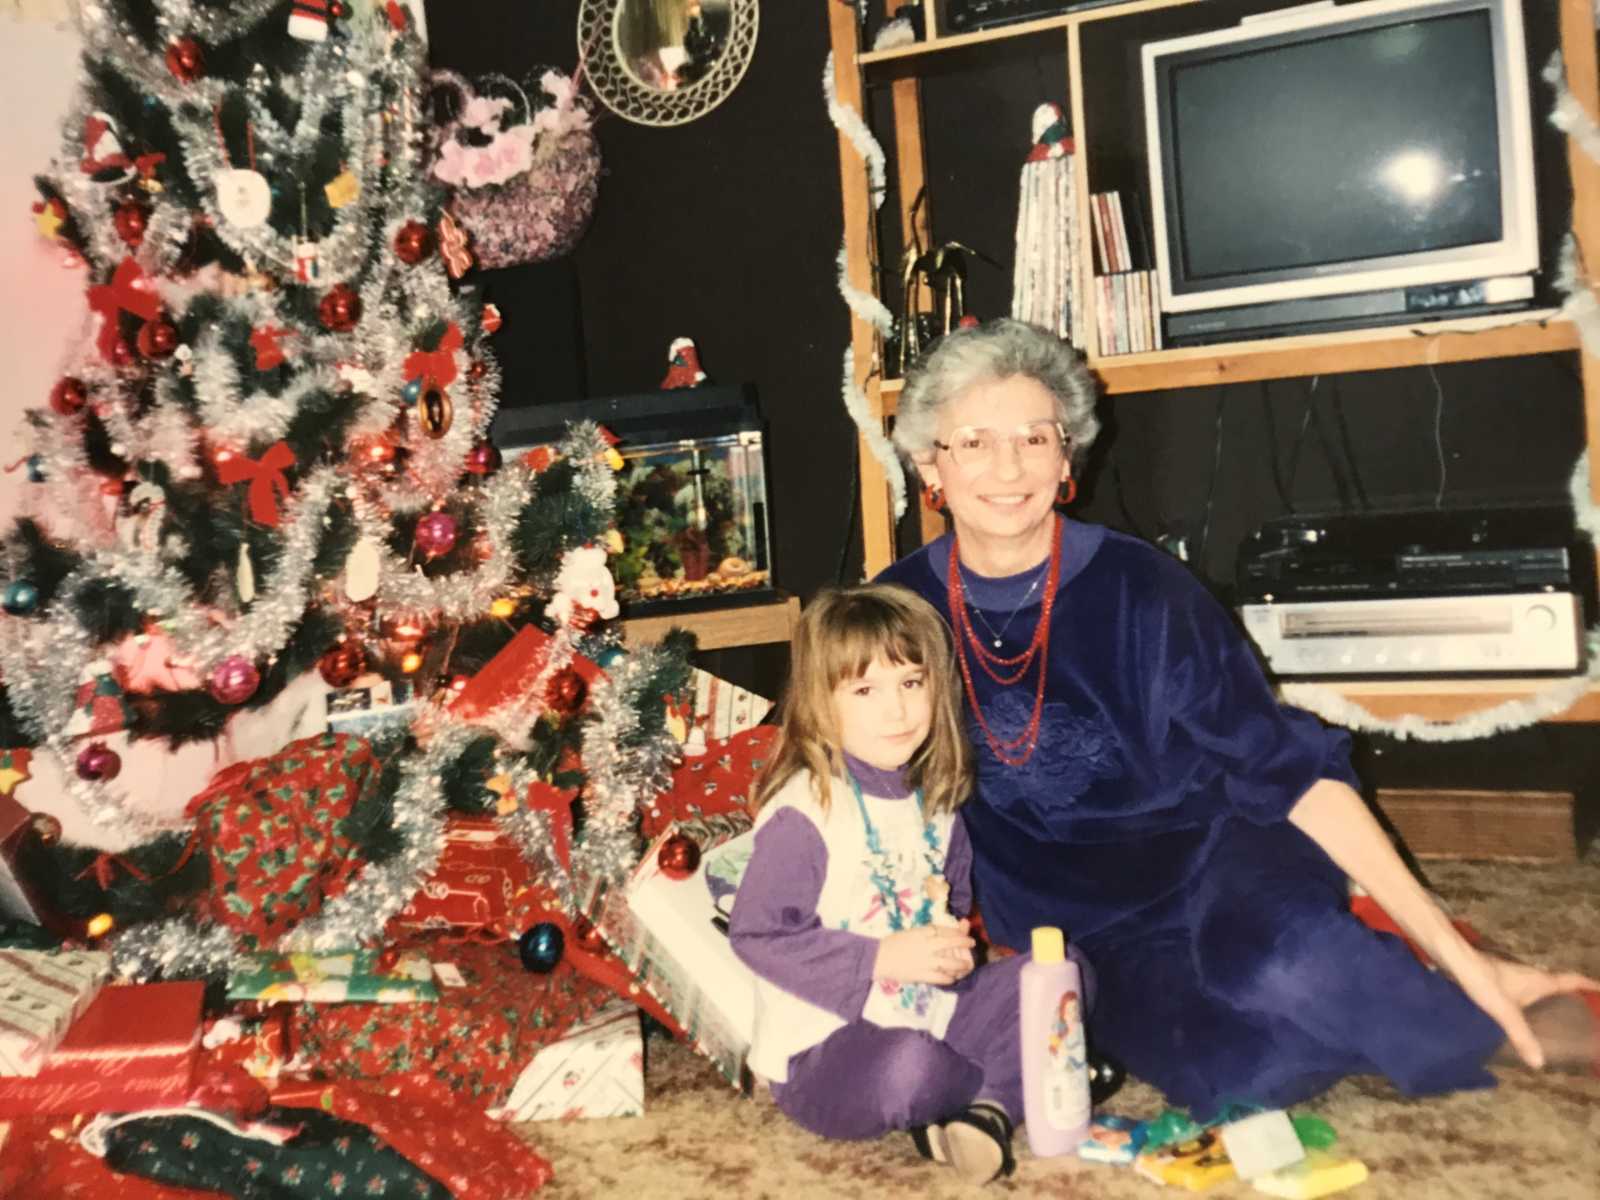 grandmother and granddaughter on christmas morning sitting by tree and presents